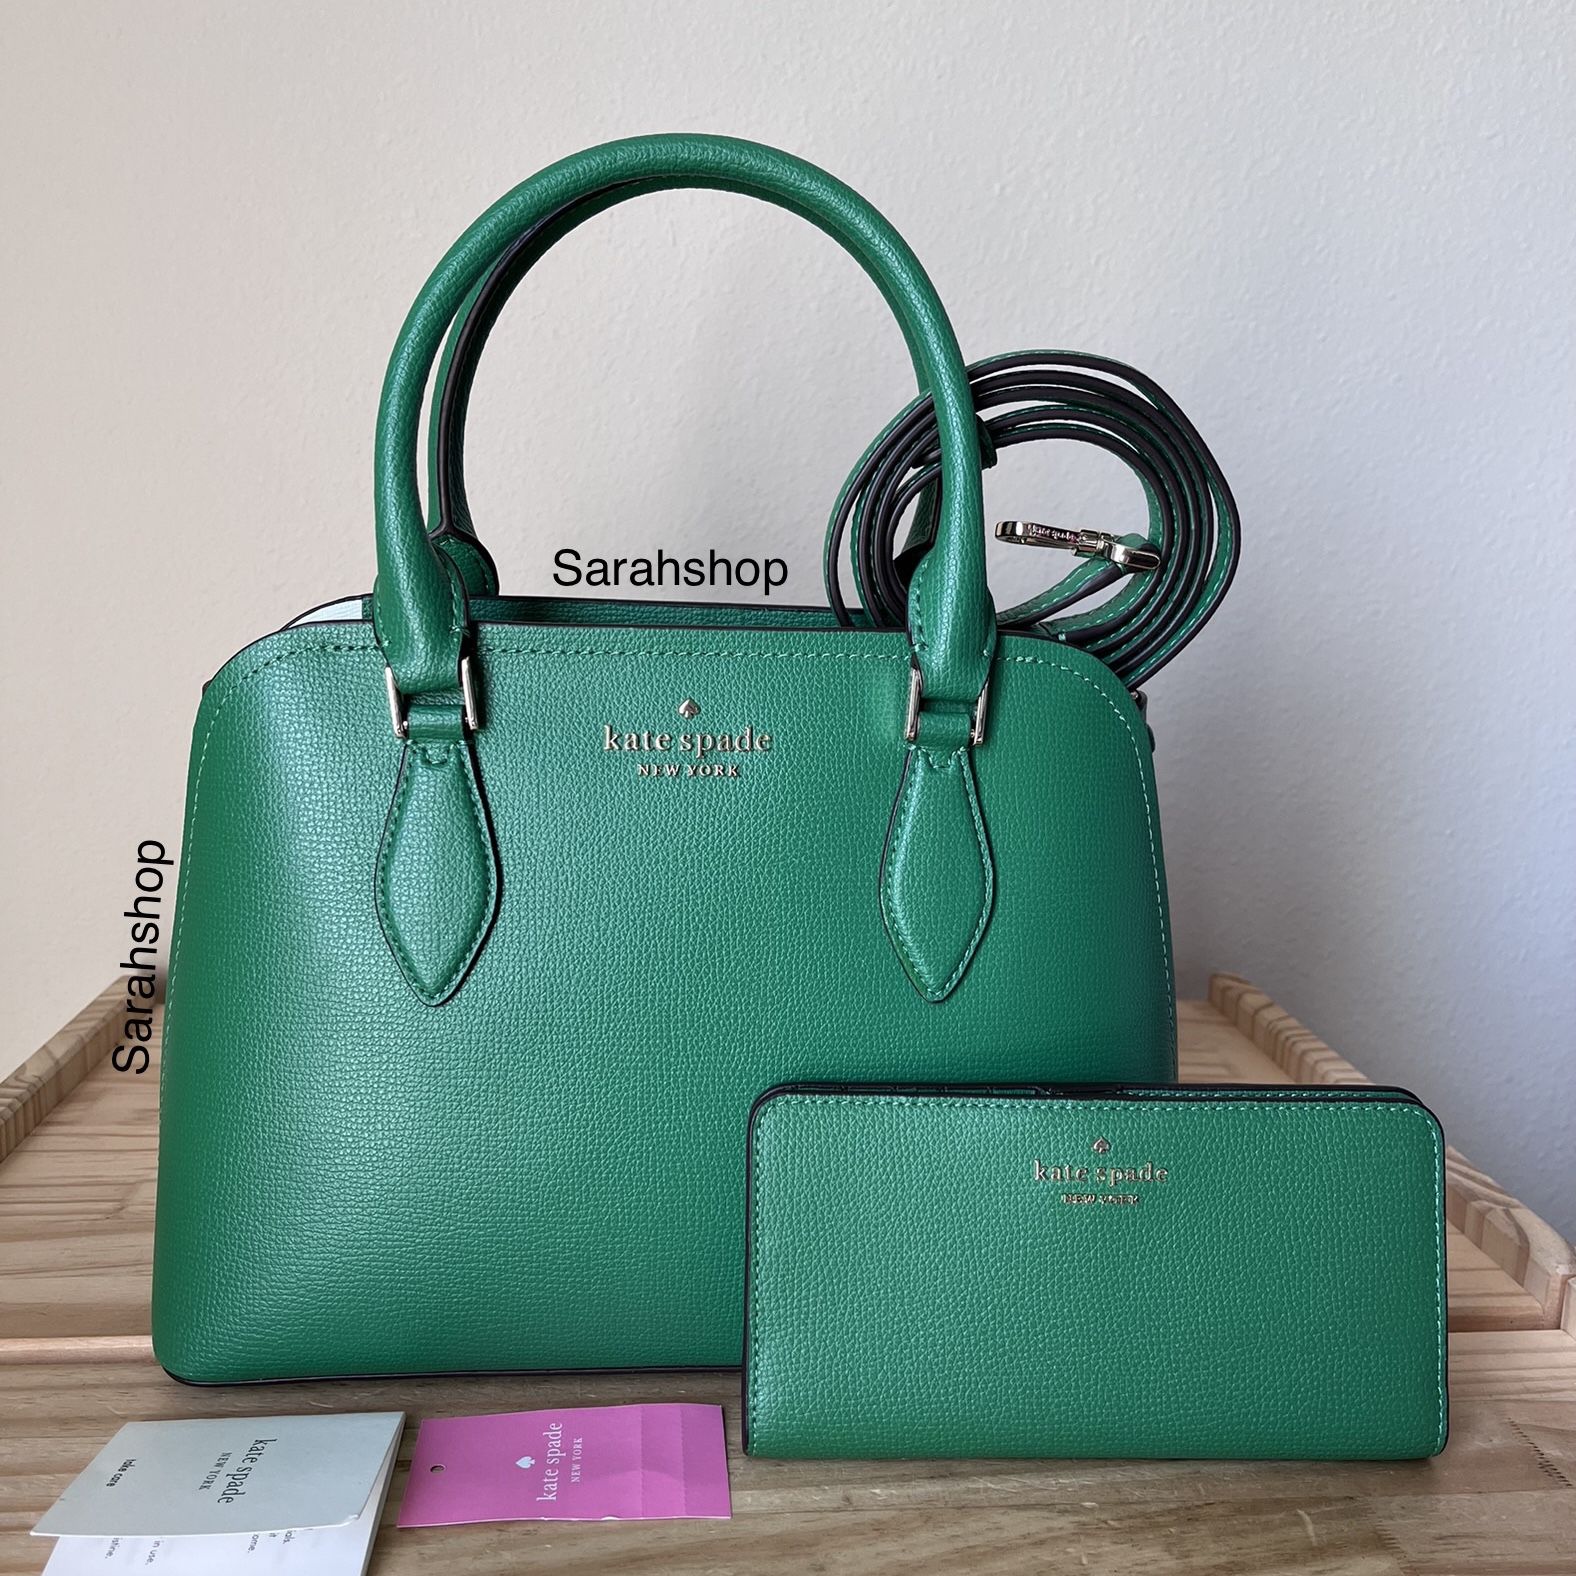 Kate Spade Black Purse With Gold Chain Handle for Sale in Marina Del Rey,  CA - OfferUp